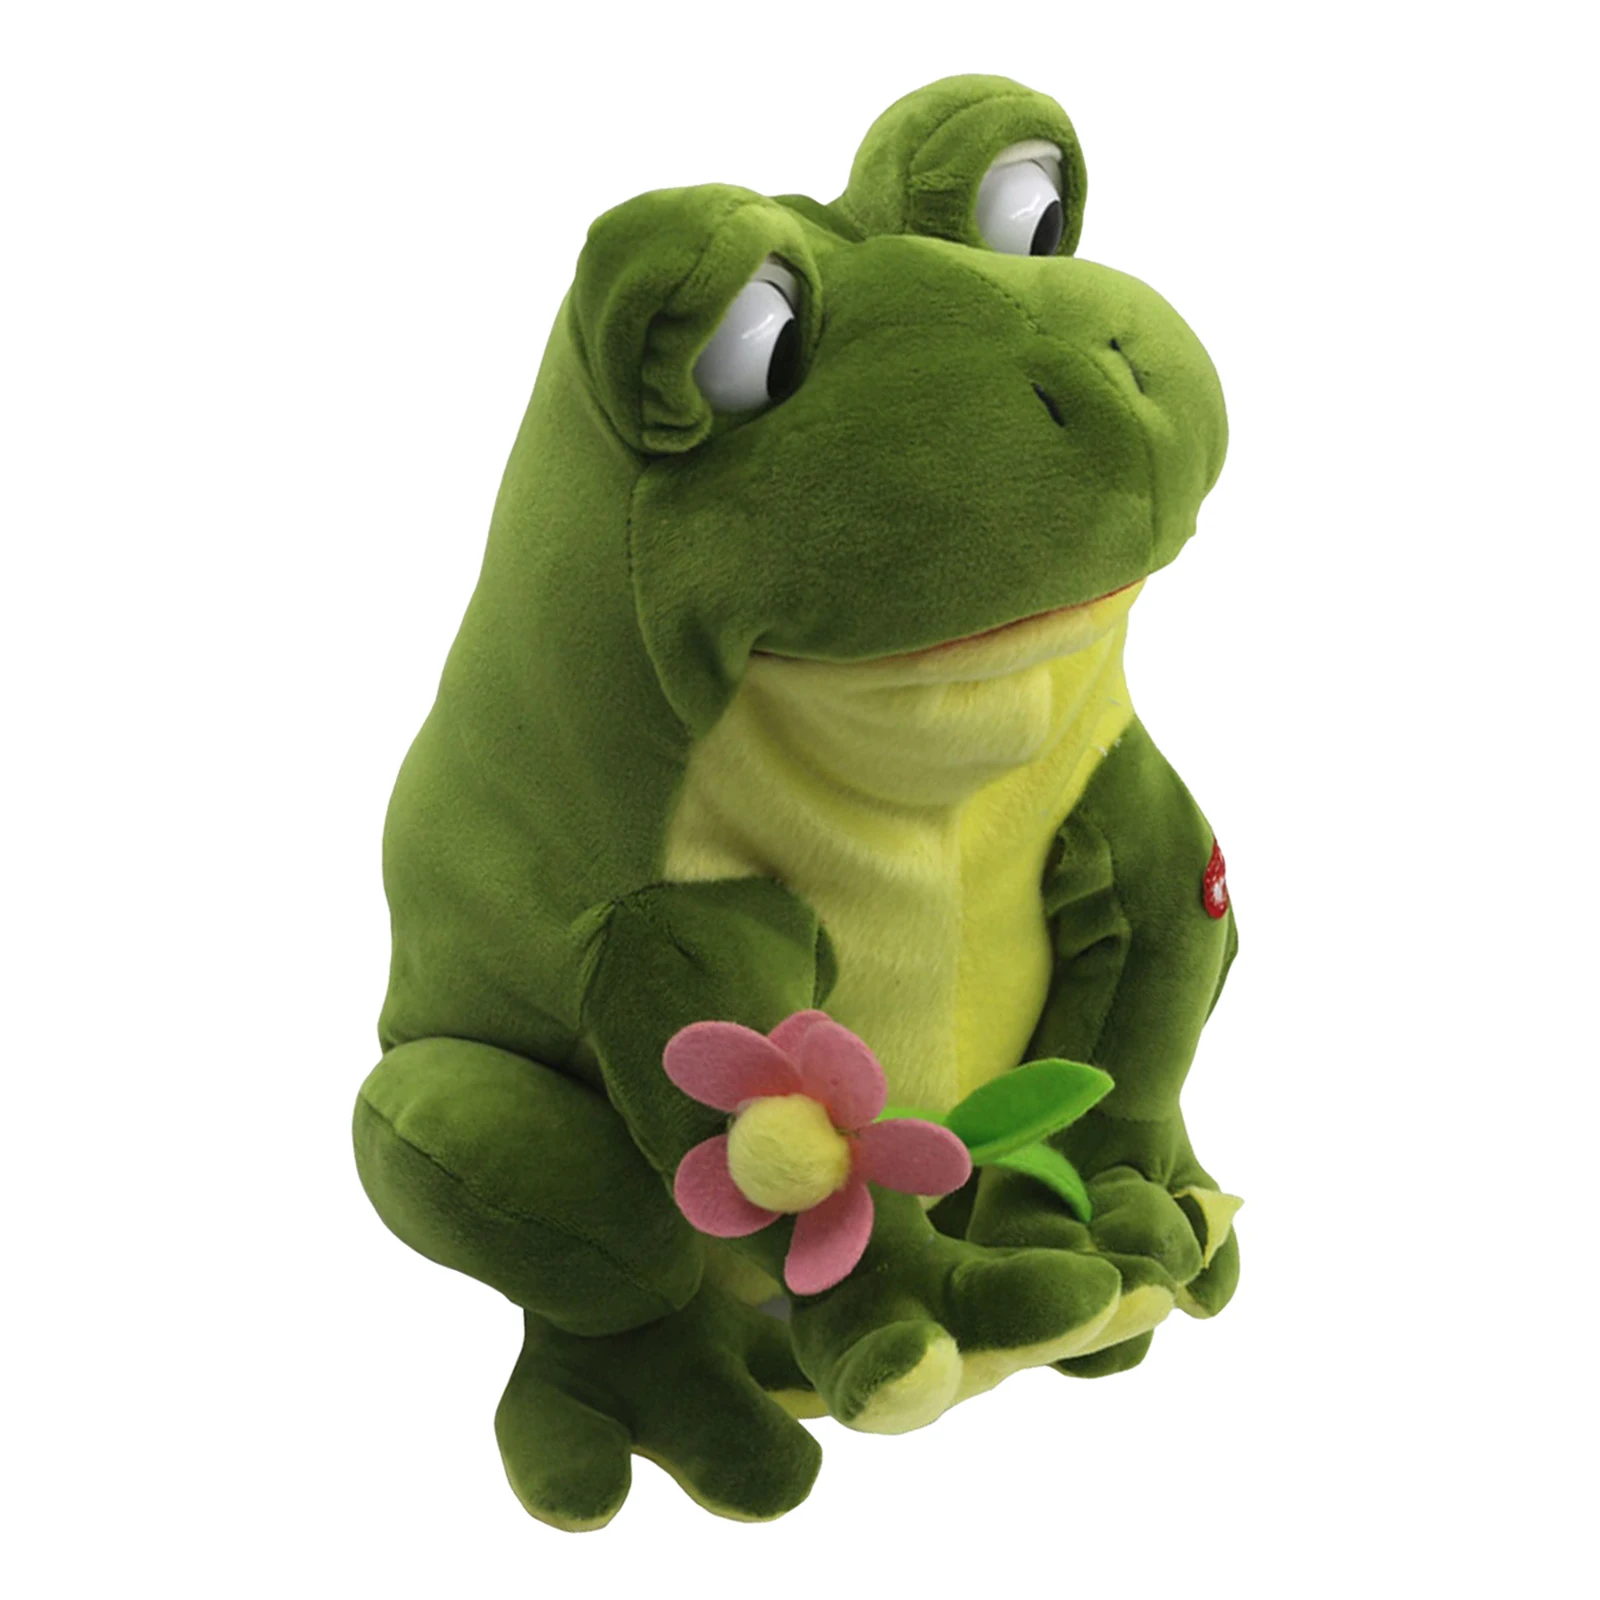 Plush Frog Figure Animal Doll Singing Dancing Toy for Toddlers Birthday Gift 